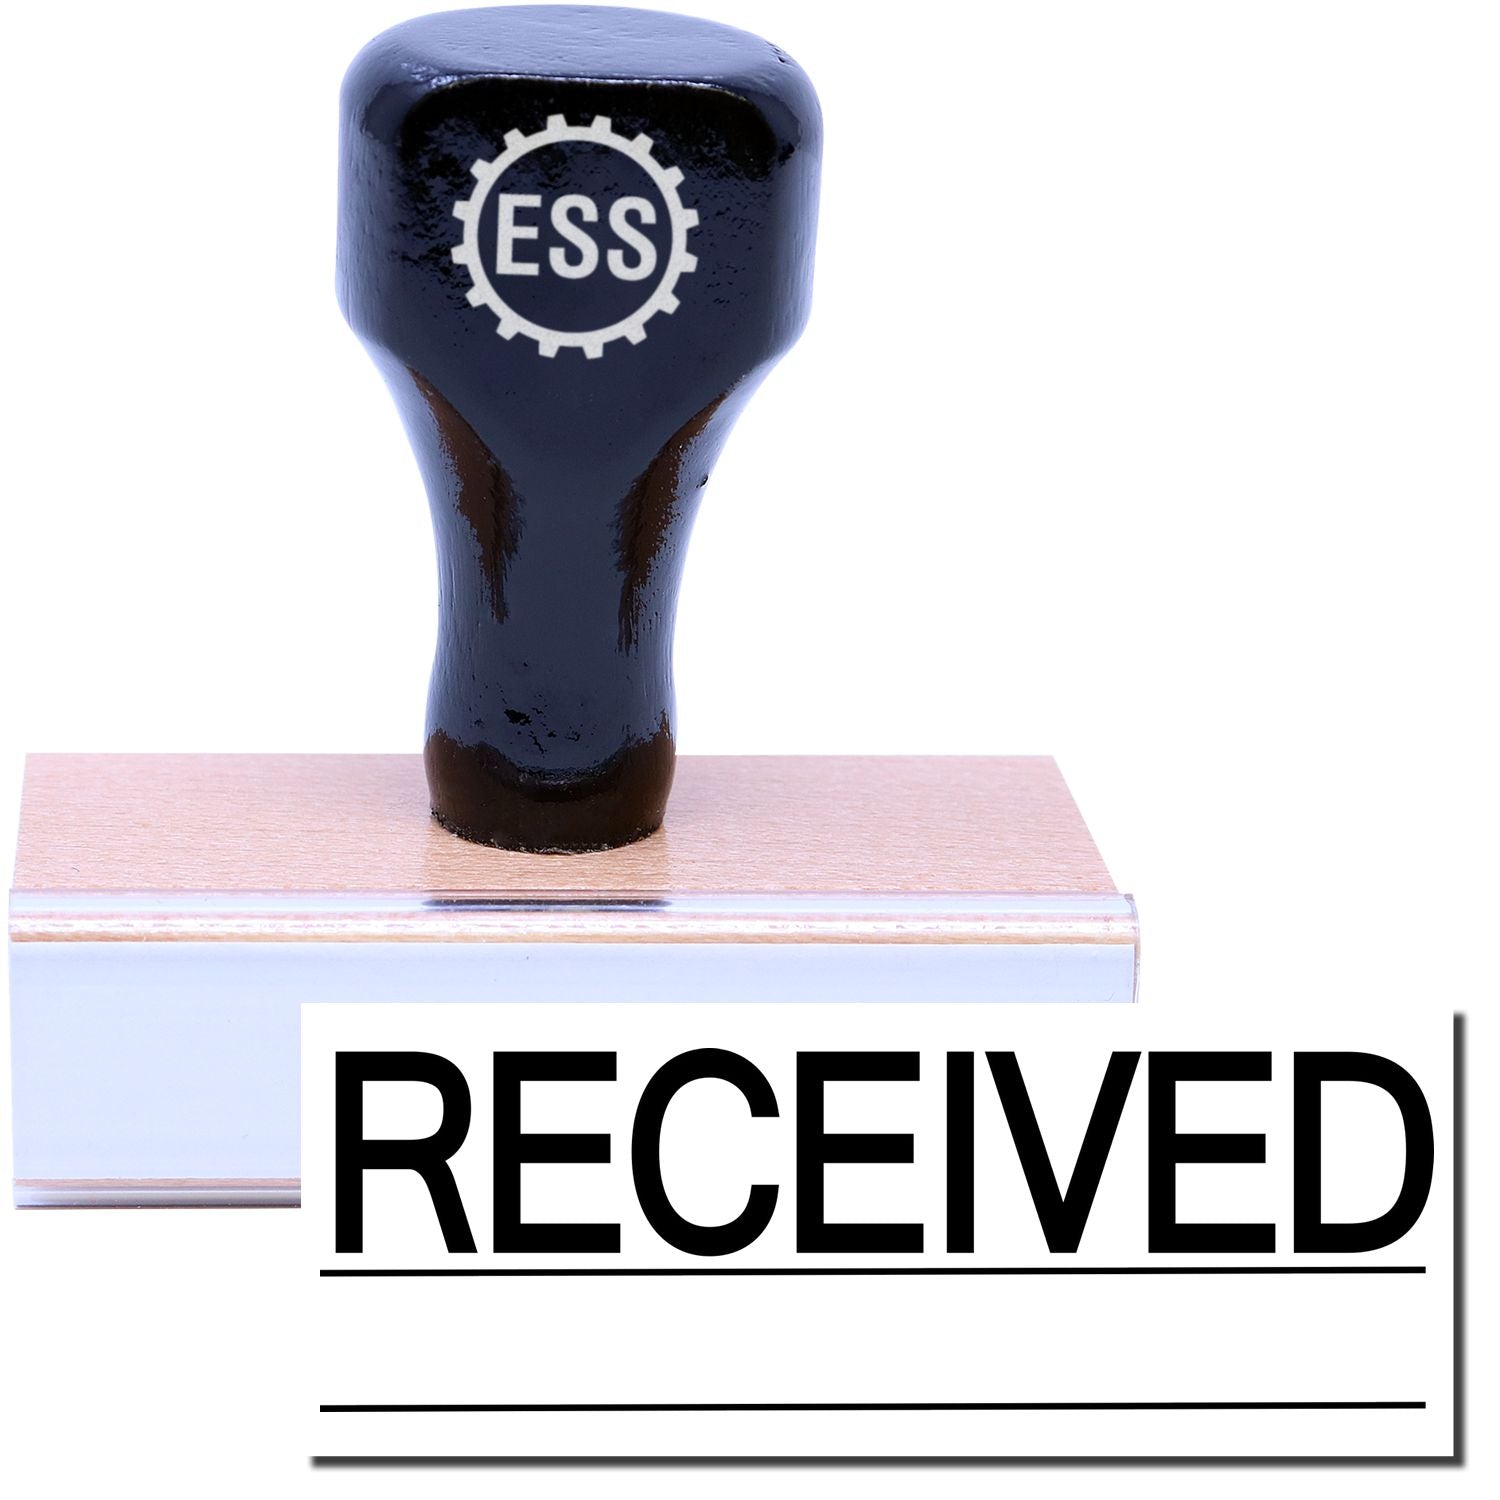 A stock office rubber stamp with a stamped image showing how the text "RECEIVED" in a large font with a line underneath the text is displayed after stamping.